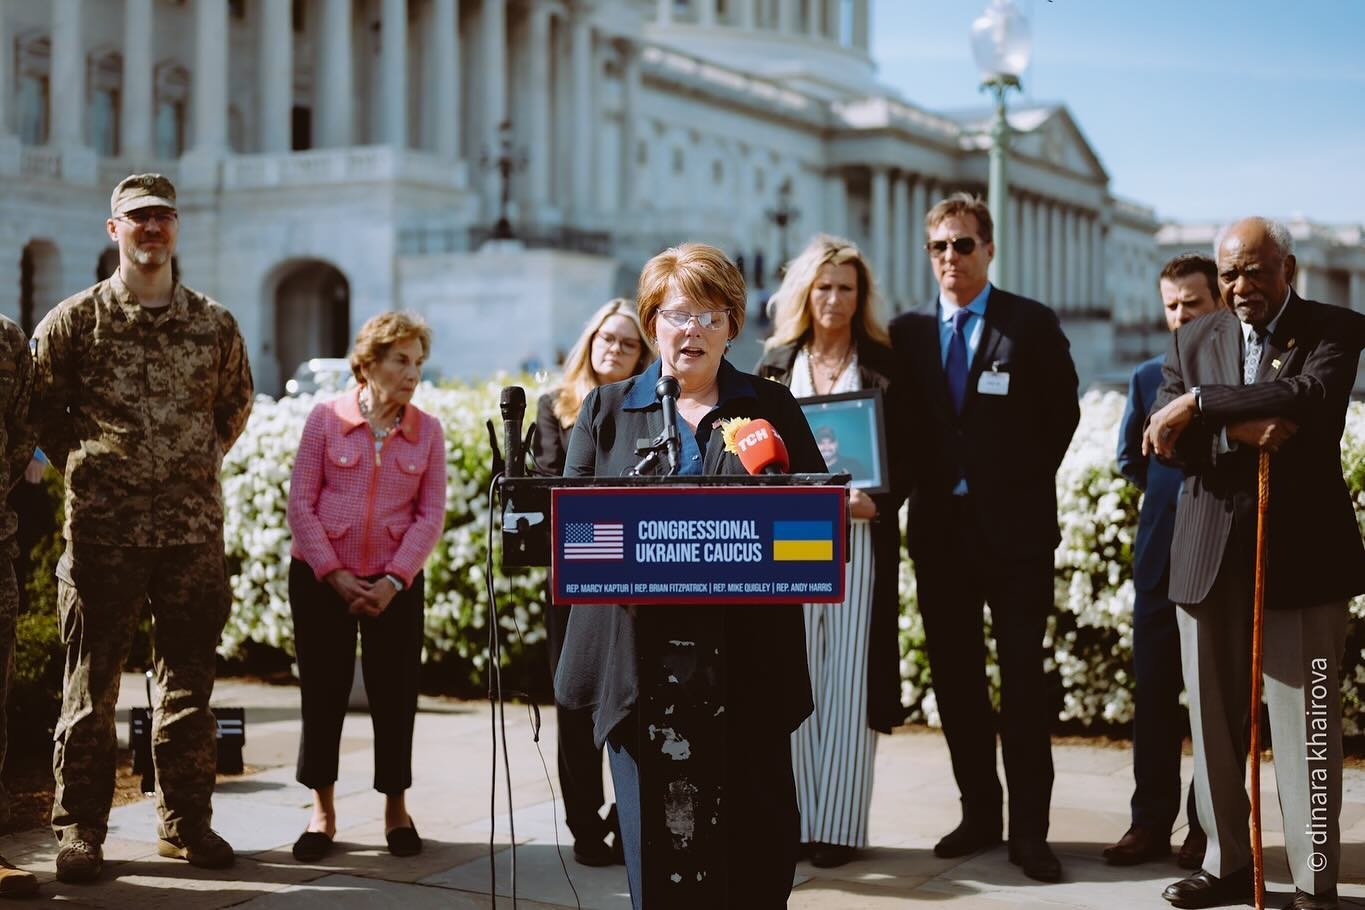 Mothers of American volunteers who were killed in Ukraine called on Congress to provide assistance to Ukraine.